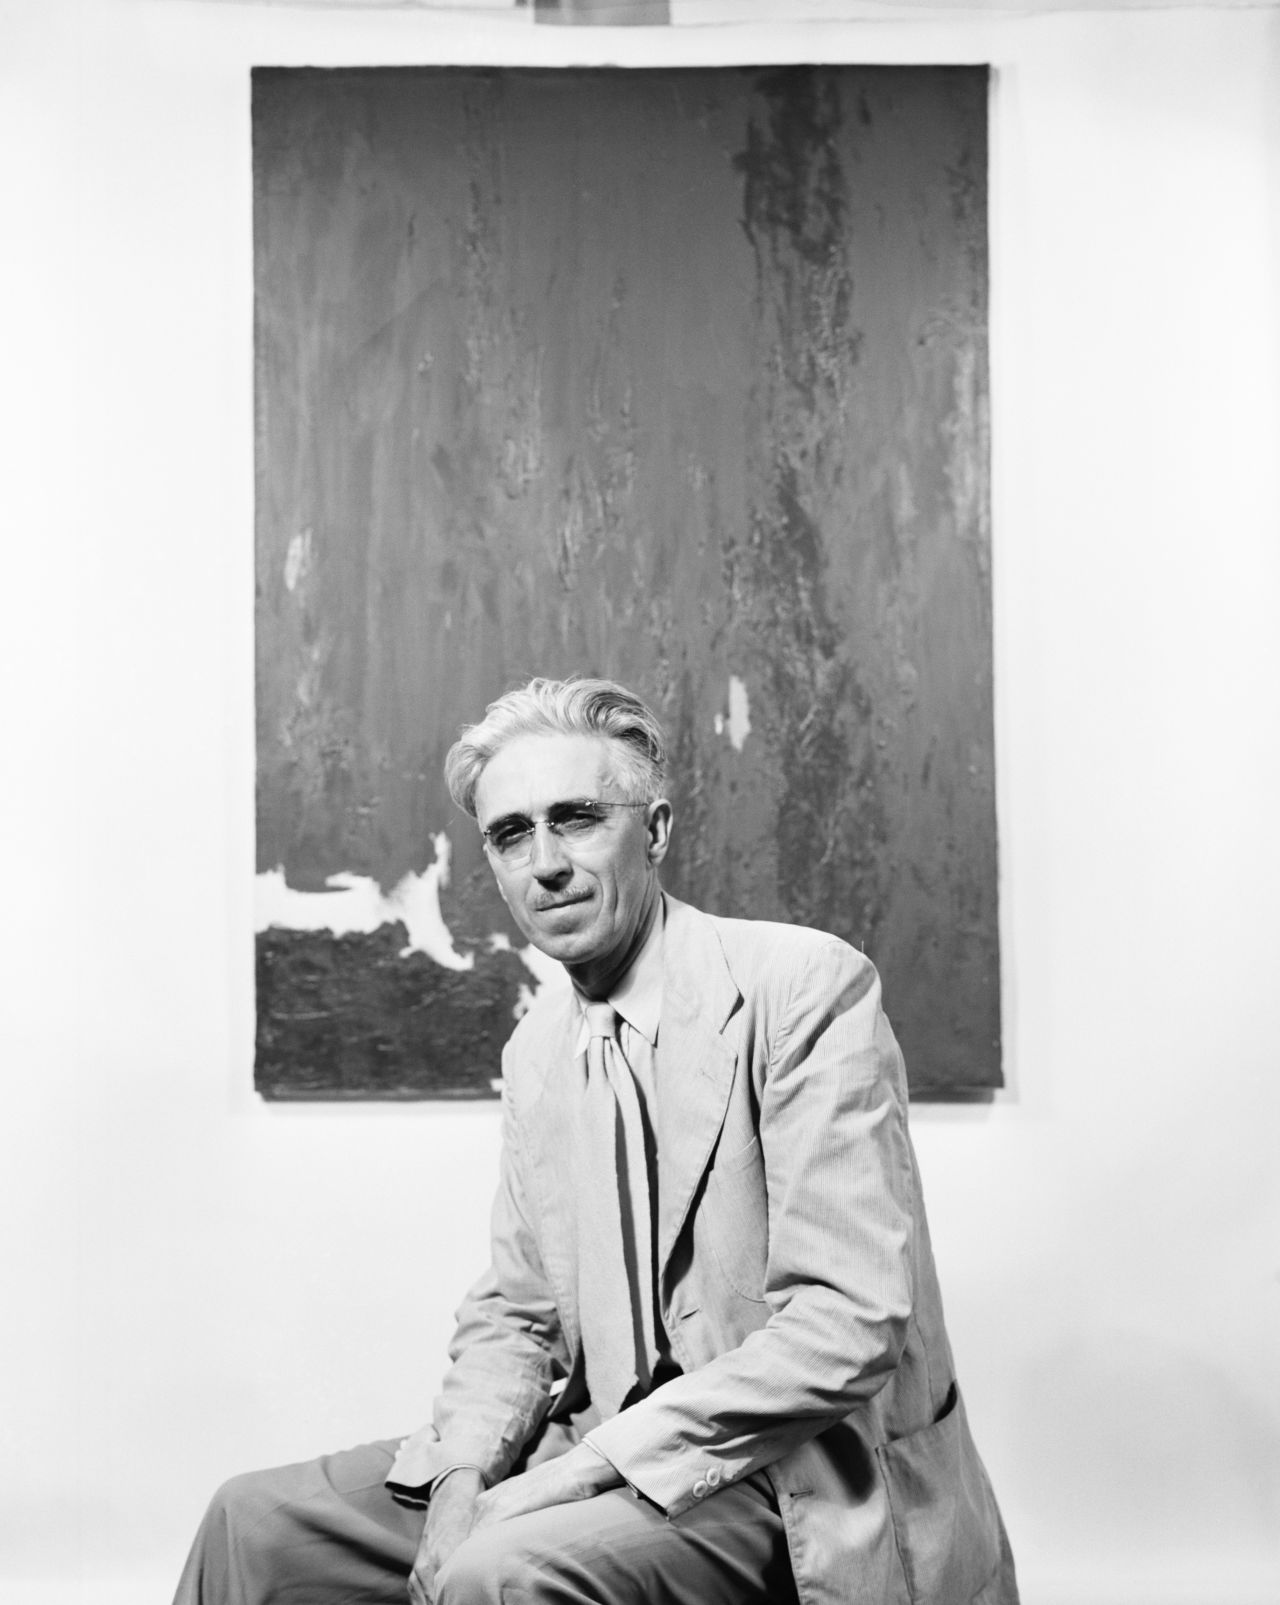 In 1951, Still was becoming a force in the art world, earning money and fame. He informed his art dealer "quite politely and with all respect that he is going to remove himself from the commercial aspect of the art world," Sobel says. 